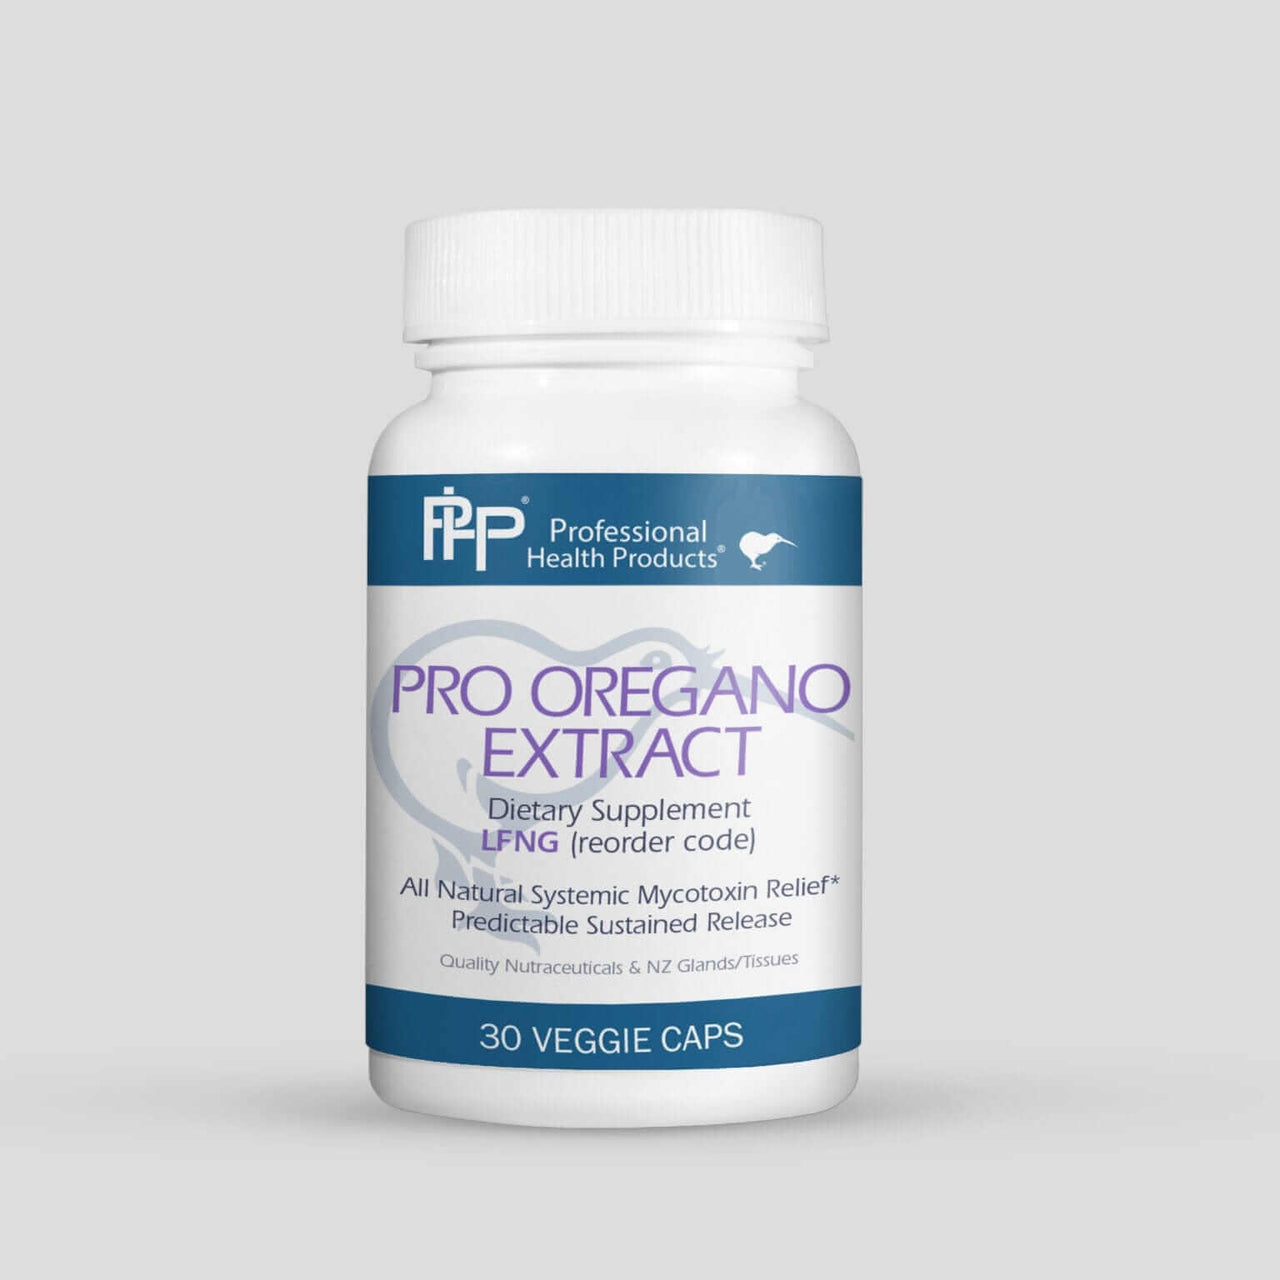 Pro Oregano Extract * Prof Health Products Supplement - Conners Clinic